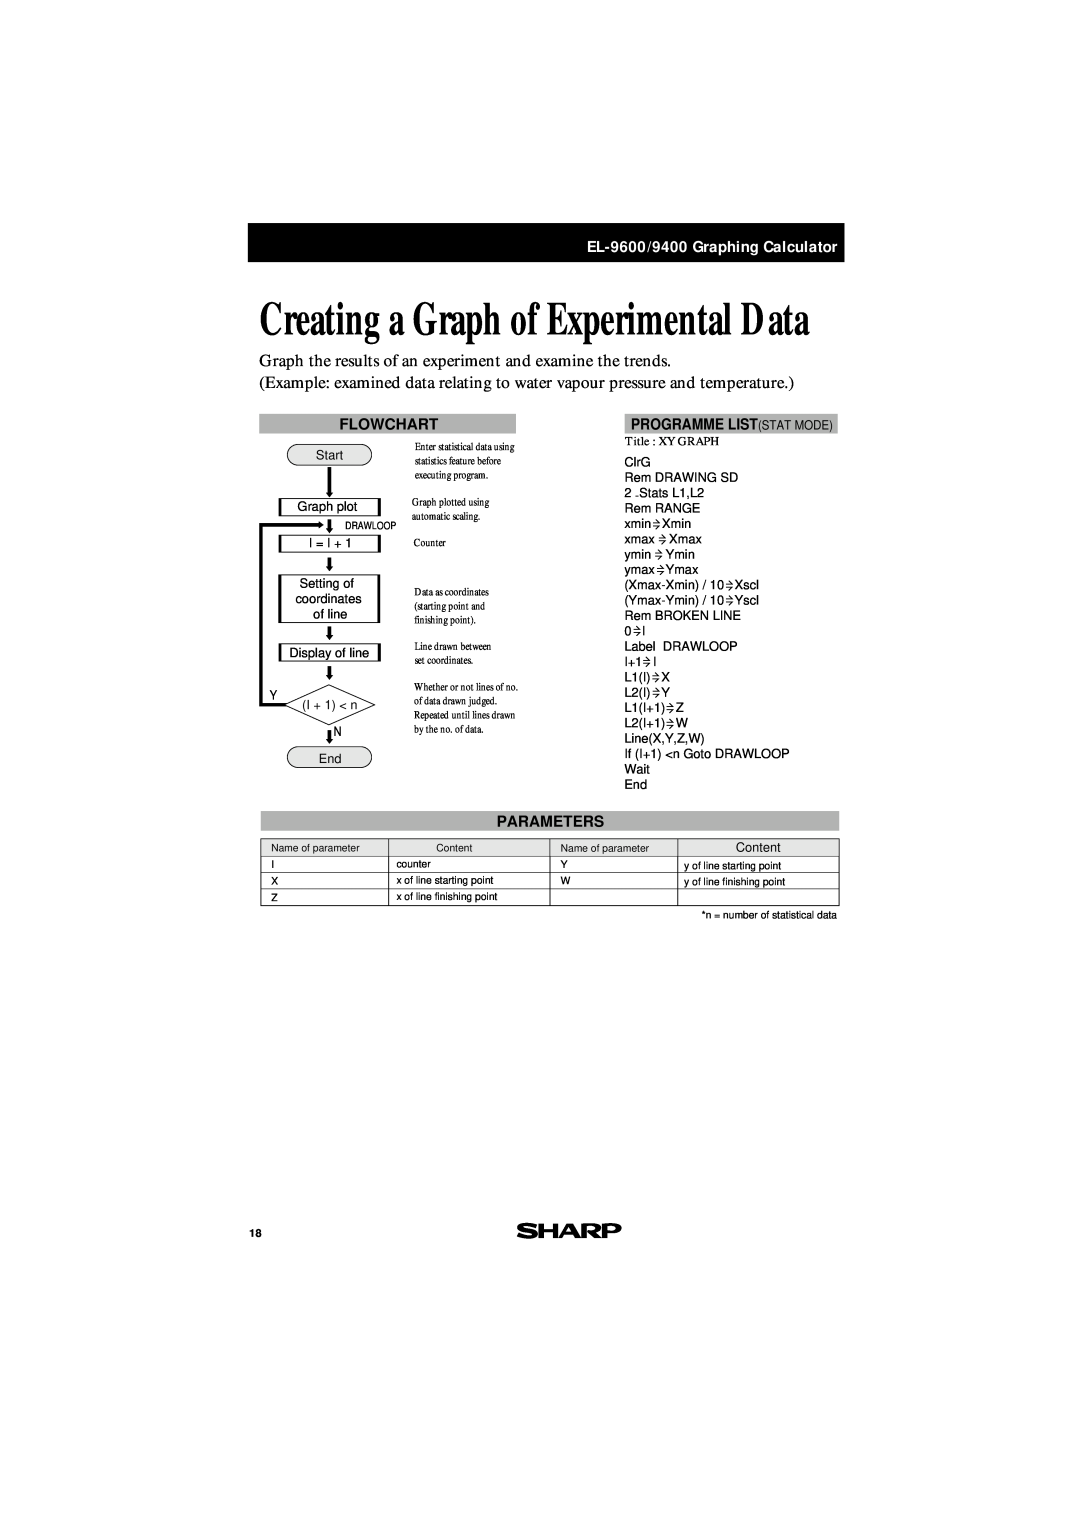 Sharp EL-9600 Creating a Graph of Experimental Data, Graph the results of an experiment and examine the trends, Flowchart 